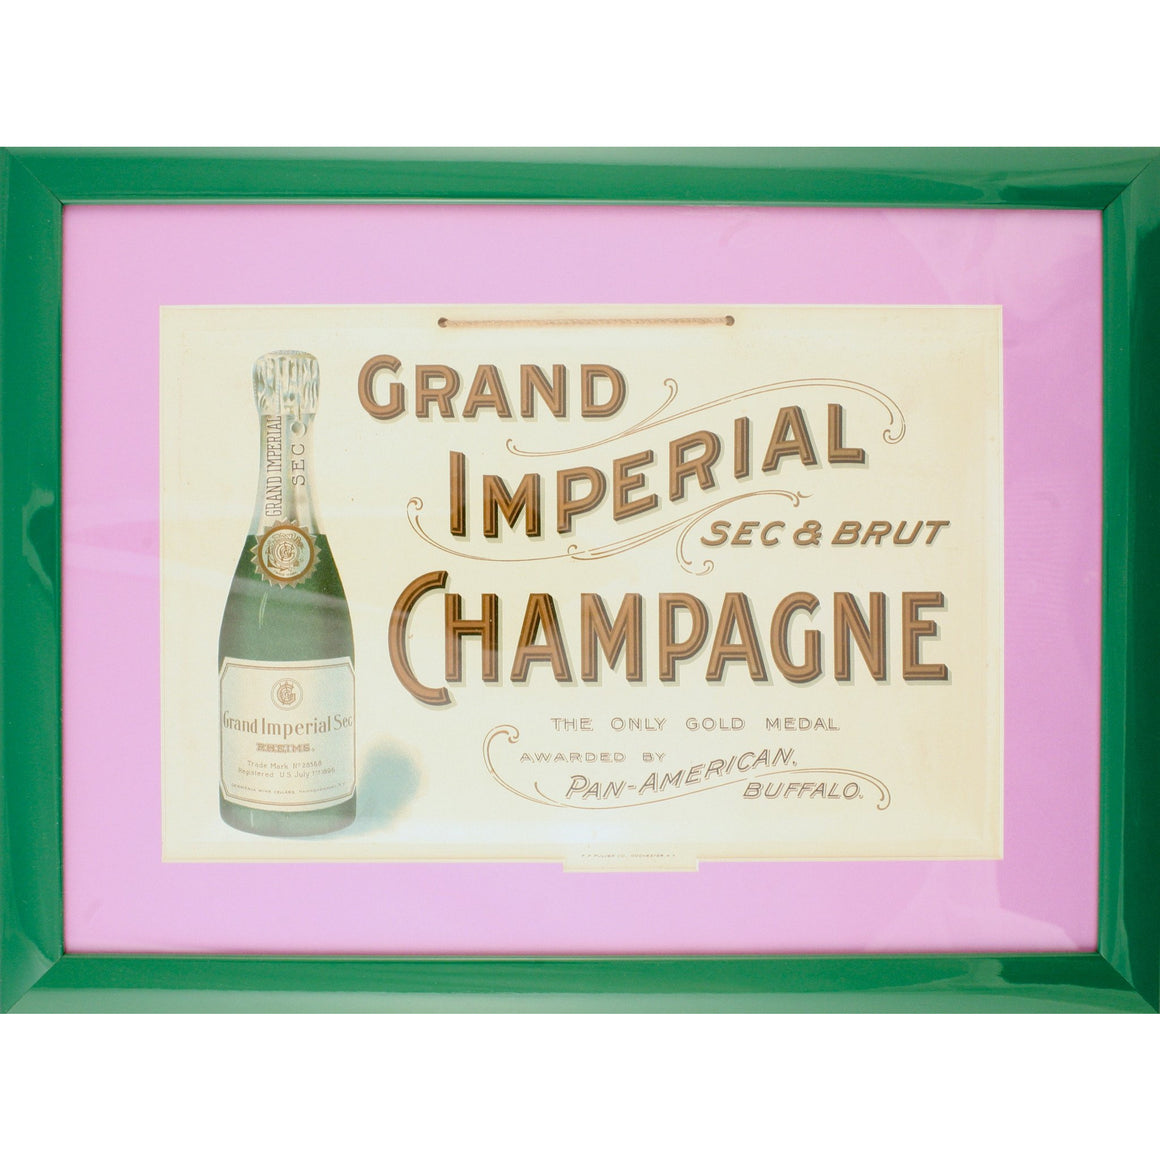 Grand Imperial Champagne